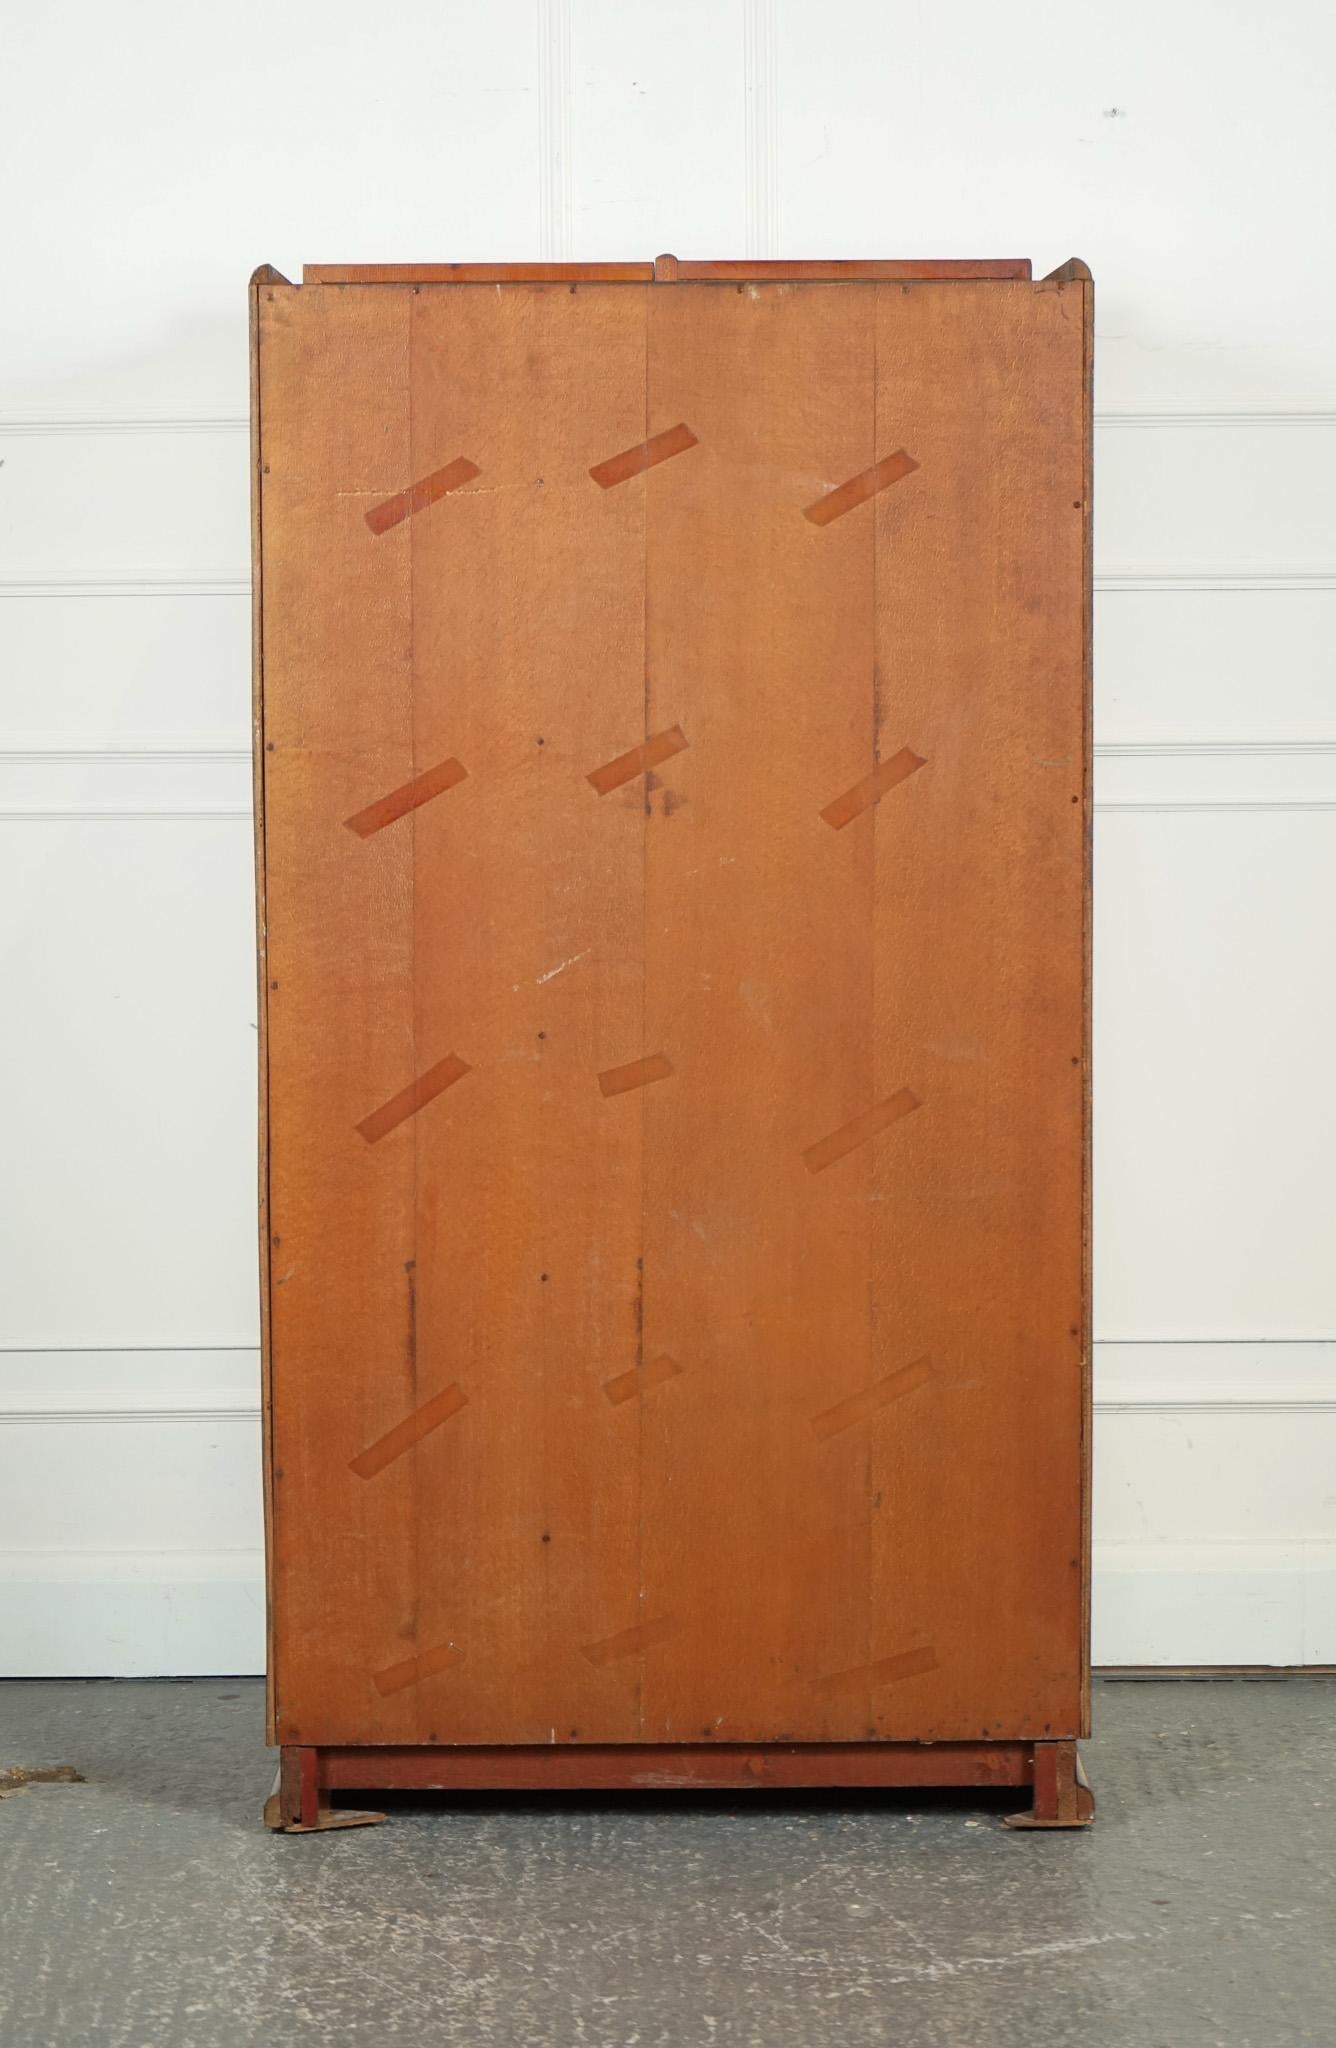 LOVELY SMALL COMPACT ART DECO BURR WALNuT WARDROBE For Sale 9